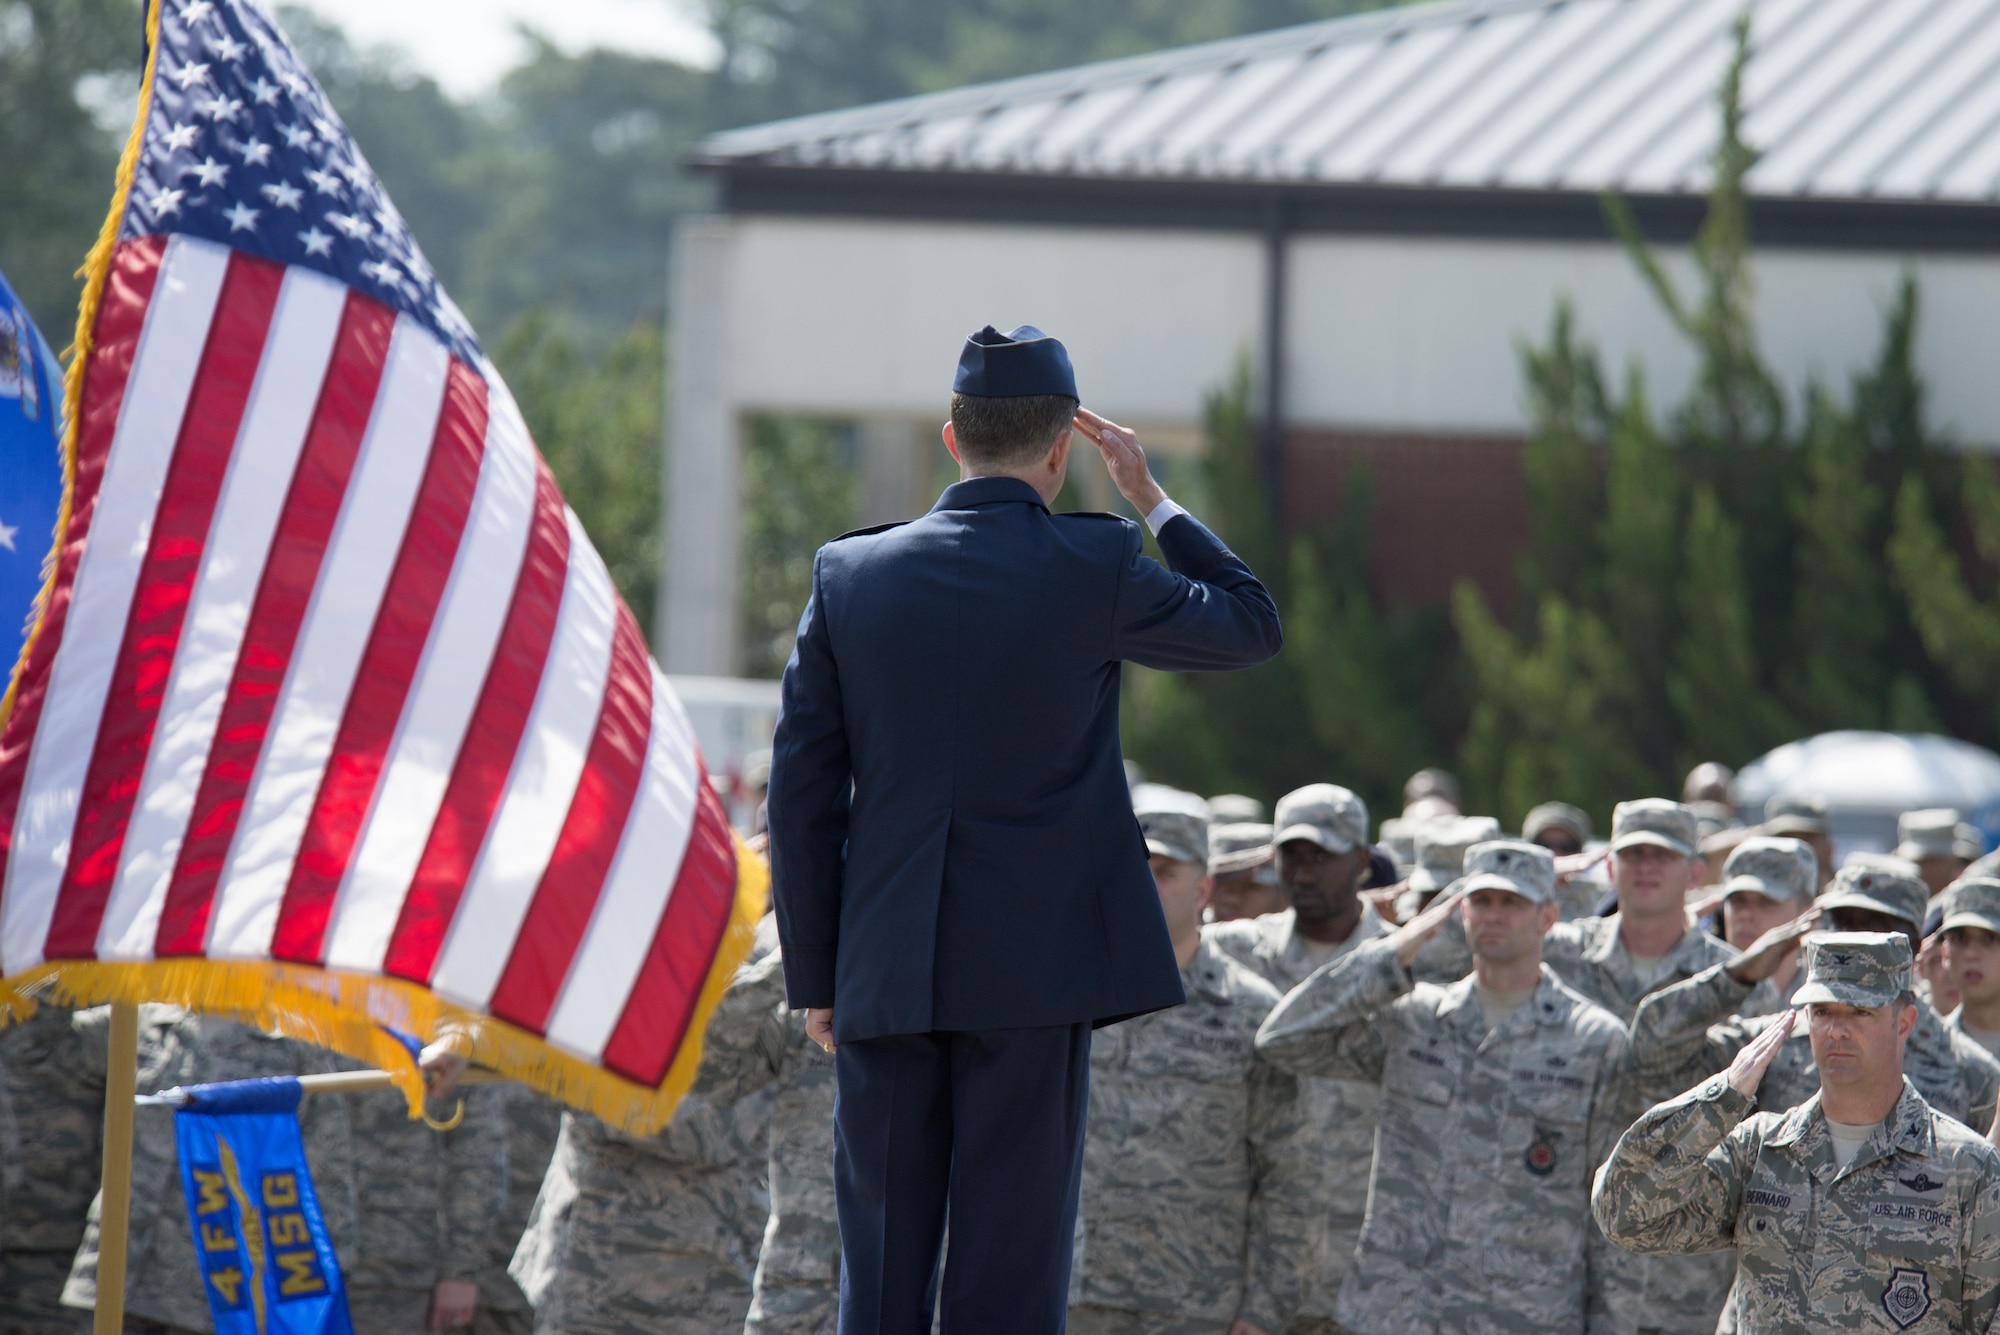 Col. Christopher Sage, 4th Fighter Wing commander, gives his first salute to members of the wing June 30, 2016, at Seymour Johnson Air Force Base, North Carolina. Sage was assigned to Seymour Johnson twice before and has logged more than 4,100 flight hours, including 1,100 combat hours during his 22-year career. (U.S. Air Force photo/Tech. Sgt. Chuck Broadway)